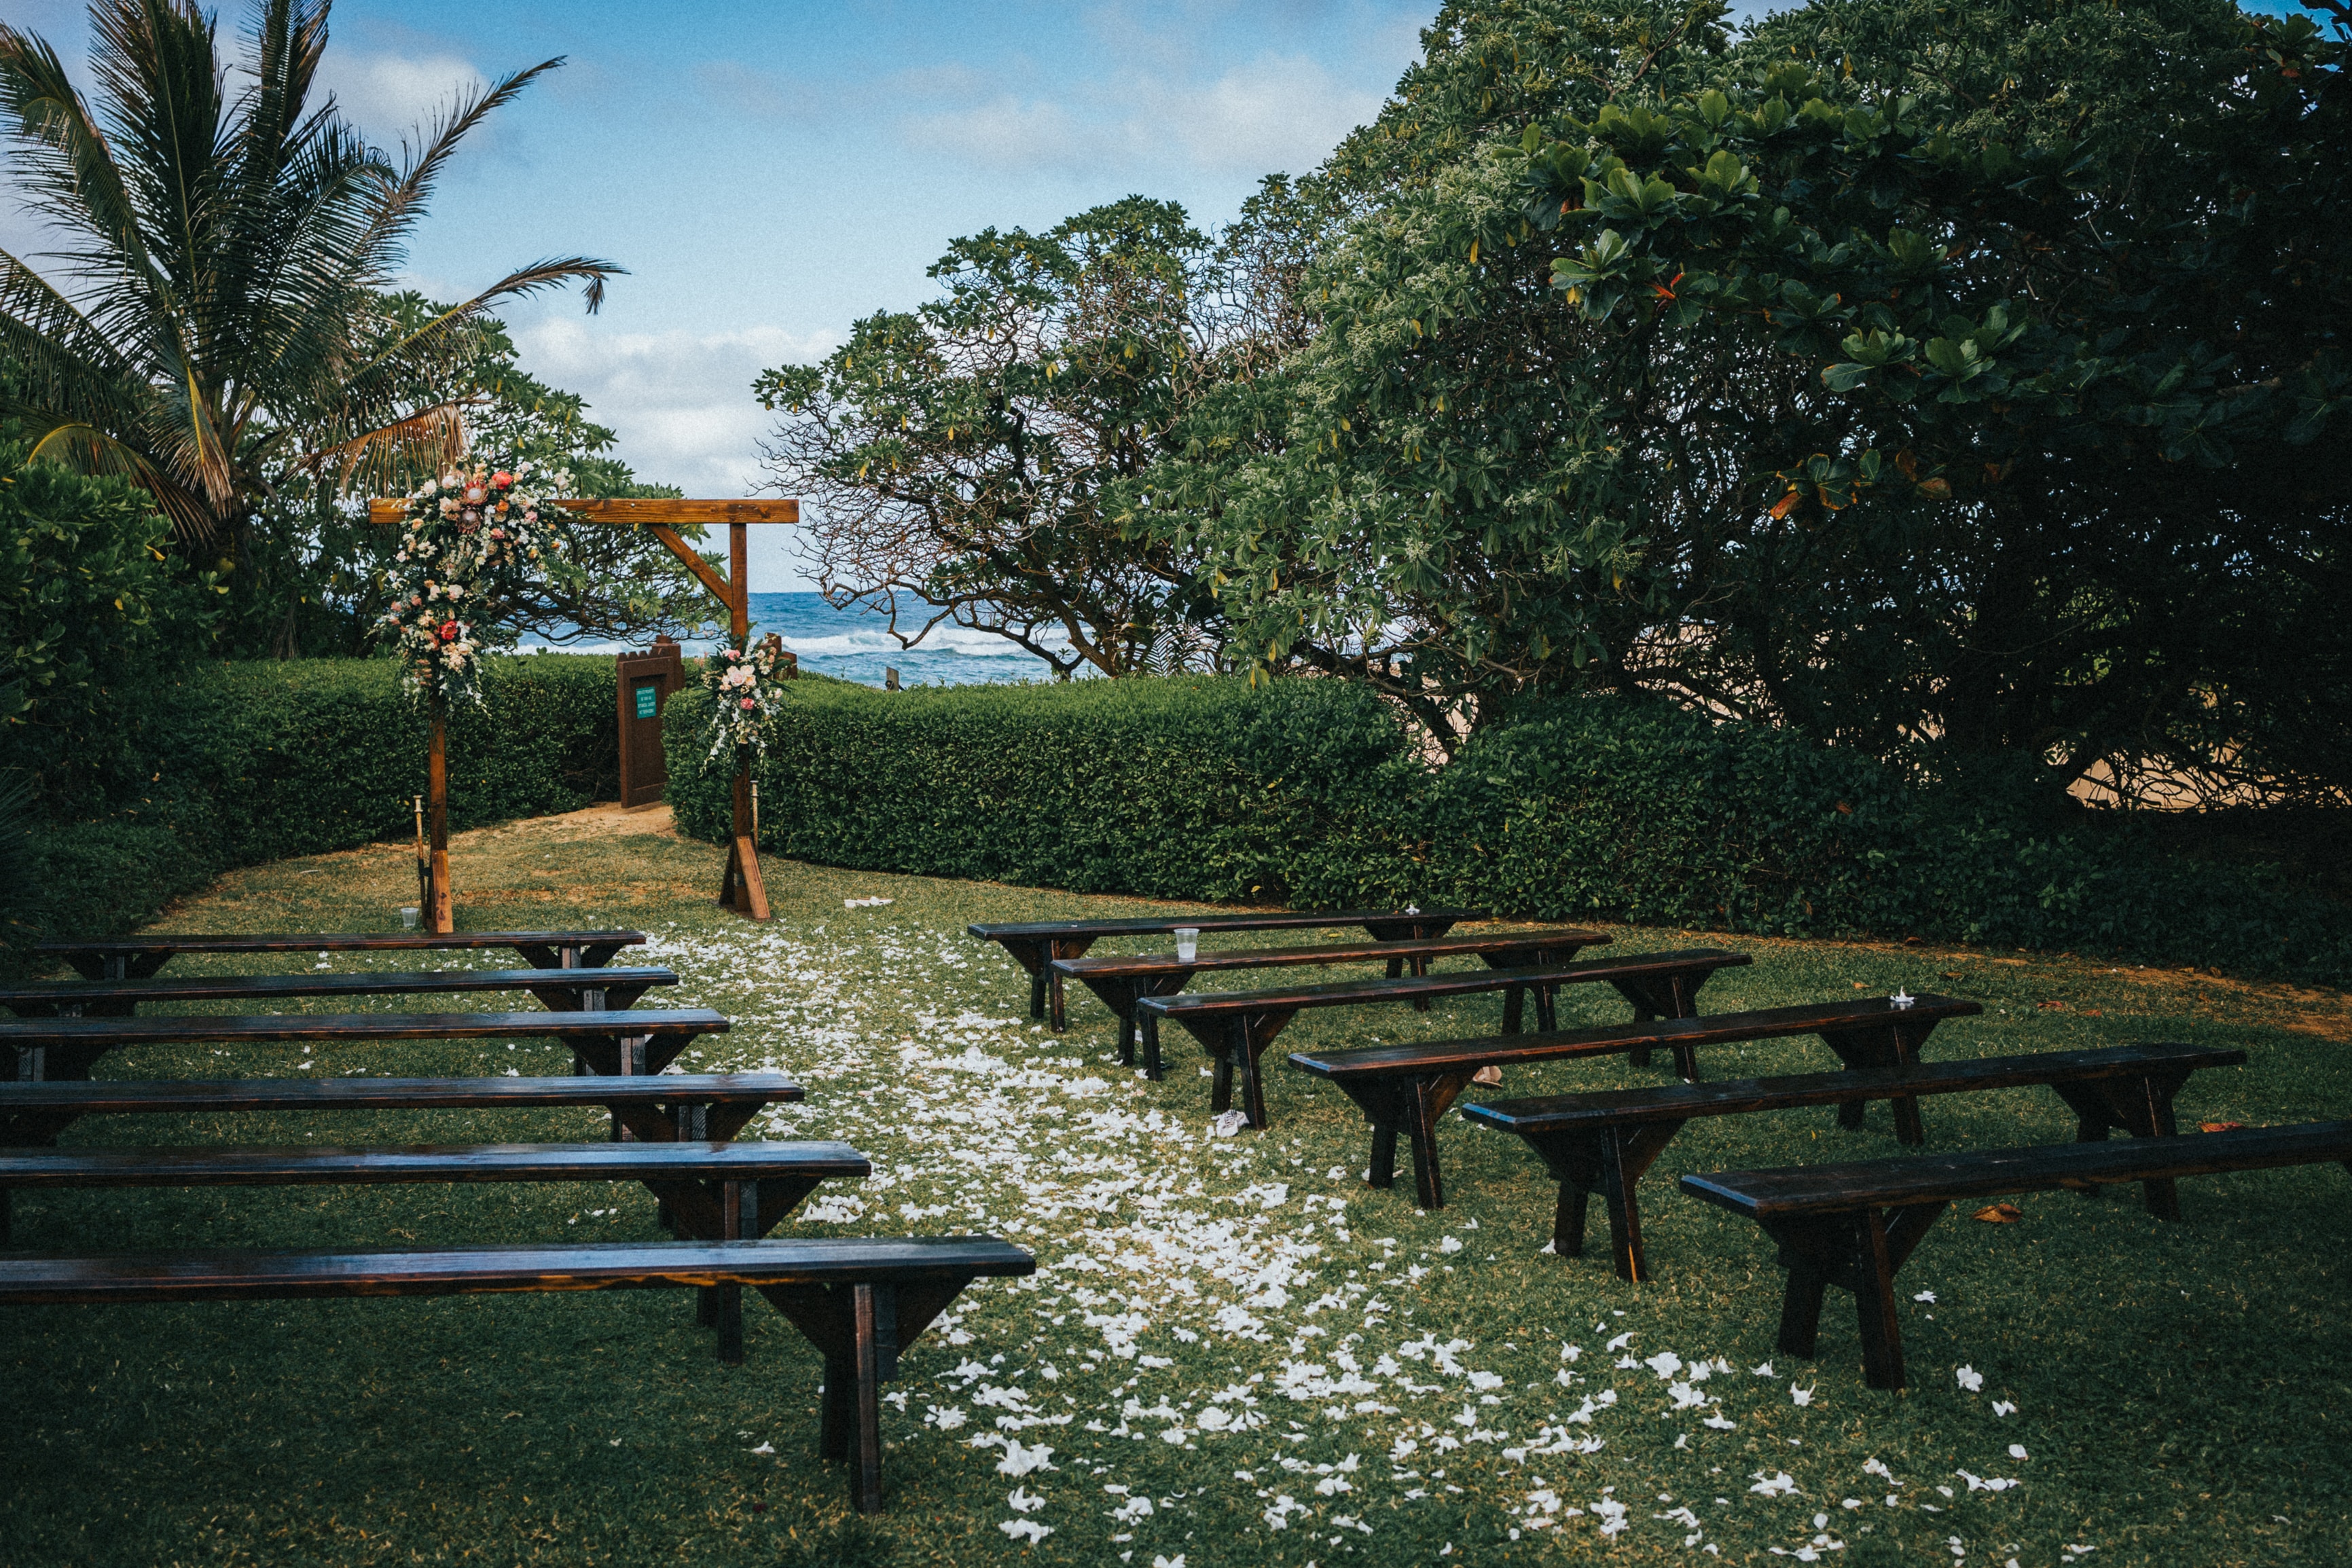 Cover Image for So You Want to Get Married in Maui? Here Are Our Top Tips for a Perfect Day